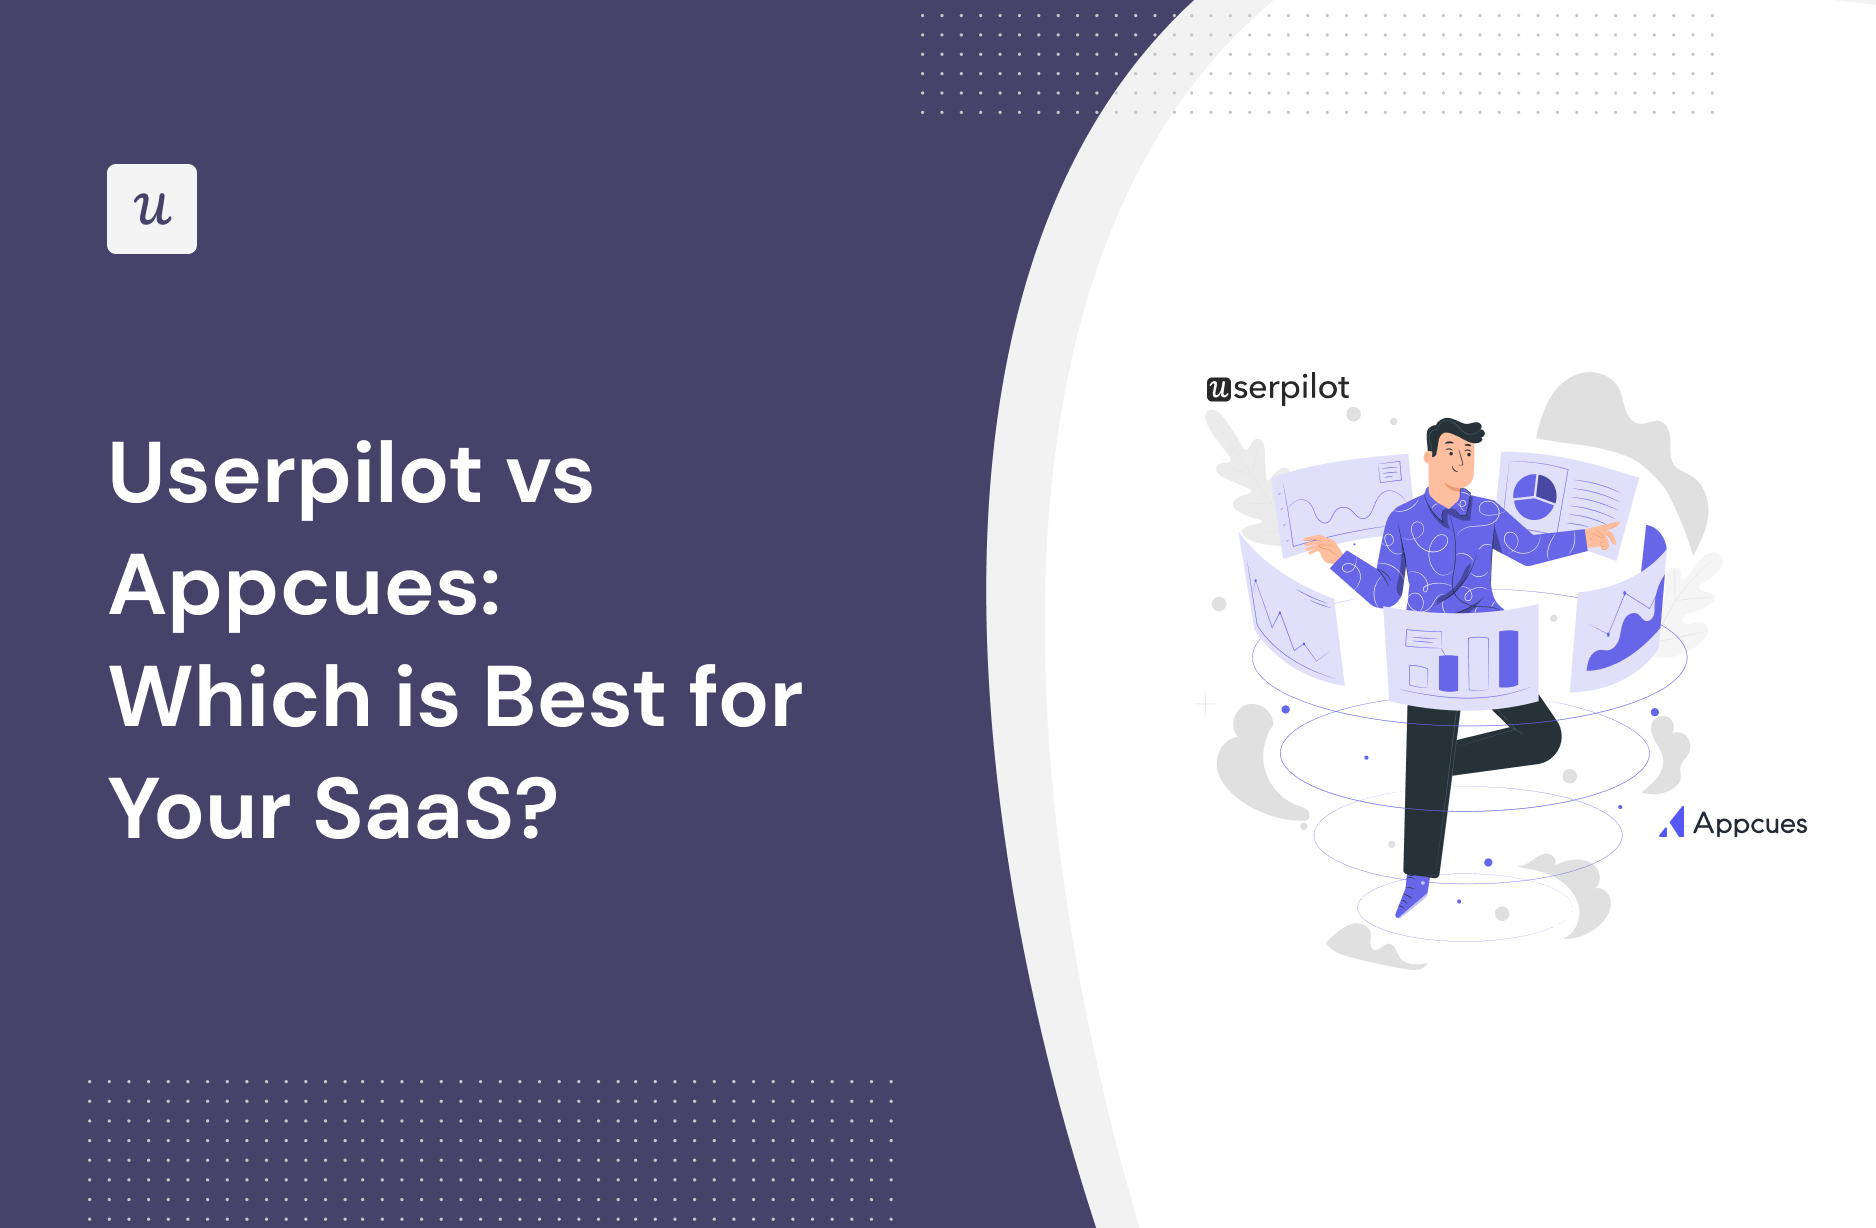 Userpilot vs Appcues: Which Is Best for Your SaaS?